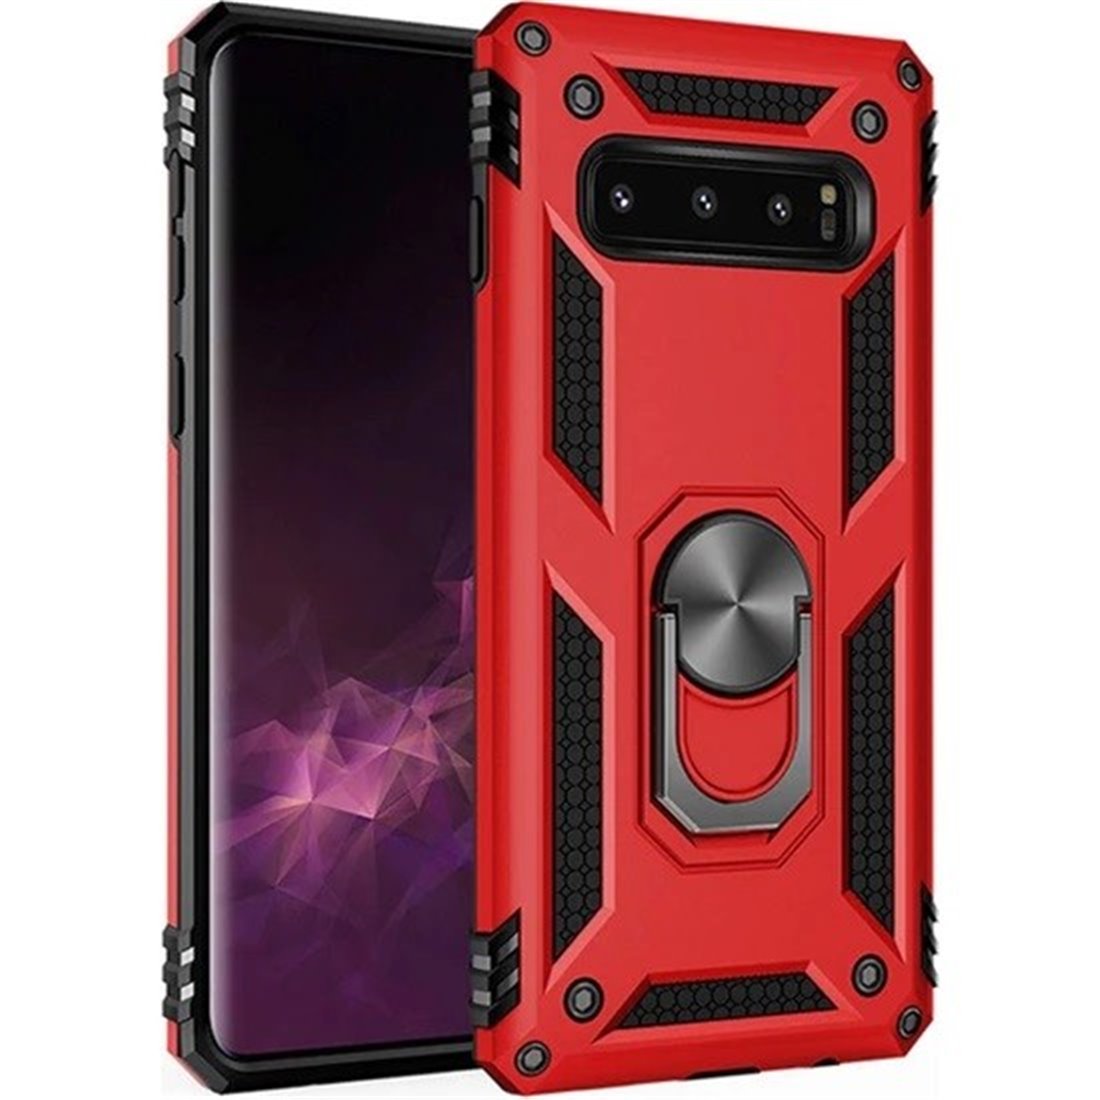 Samsung Galaxy S10 Plus Plastic Red Back Cover - Solid ring